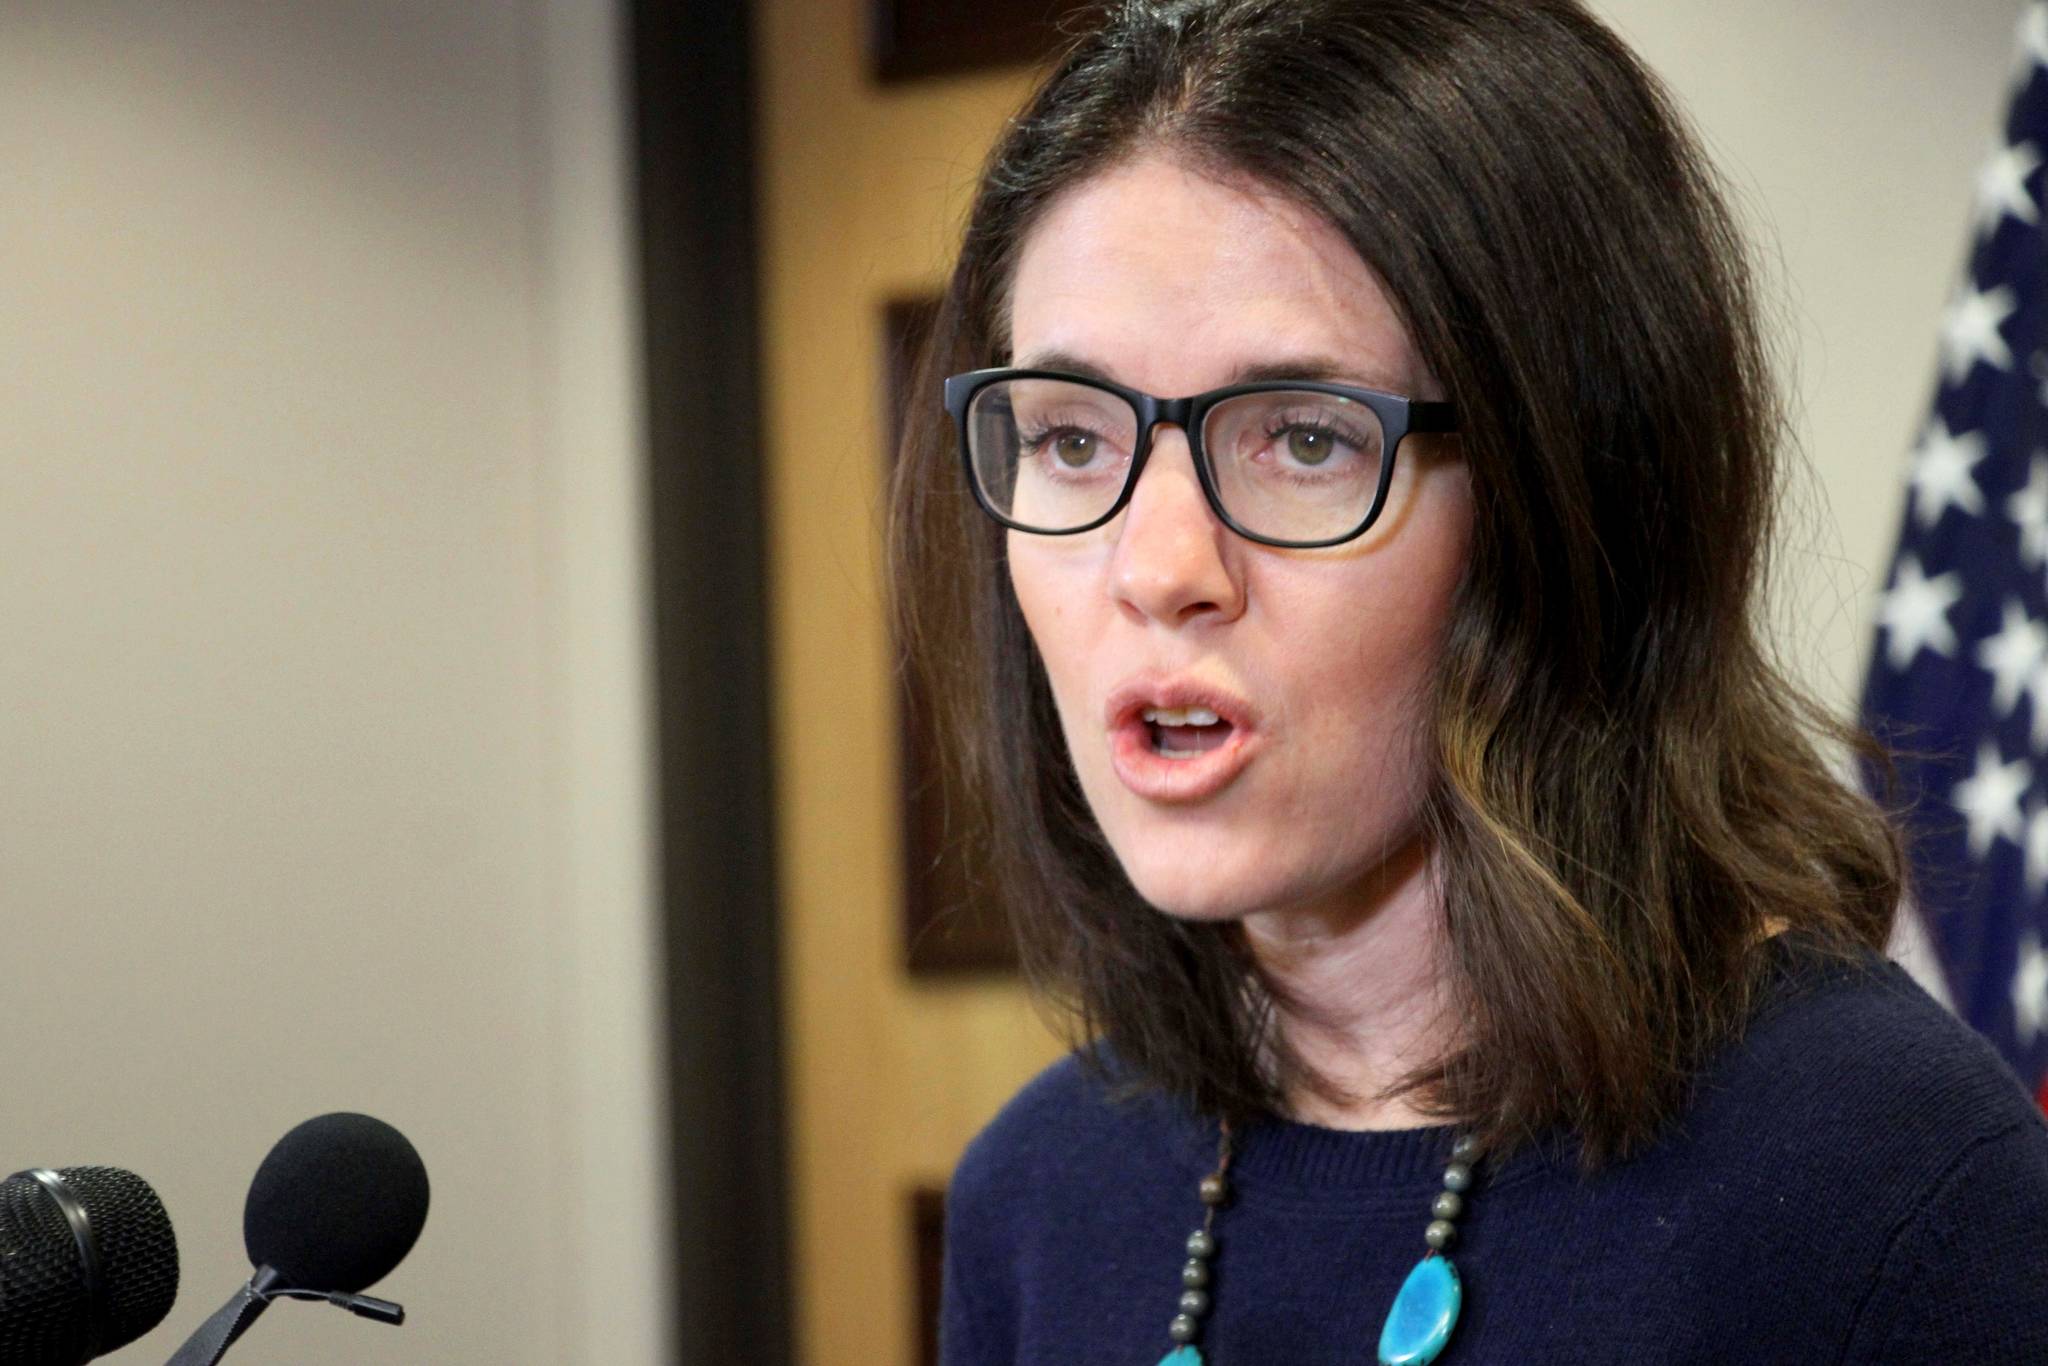 Dr. Anne Zink, the chief medical officer for the state of Alaska, addresses reporters at a news conference Monday, March 9, 2020, in Anchorage, Alaska. State officials said 23 people have been tested for the new coronavirus with no positive results. (AP Photo/Mark Thiessen)